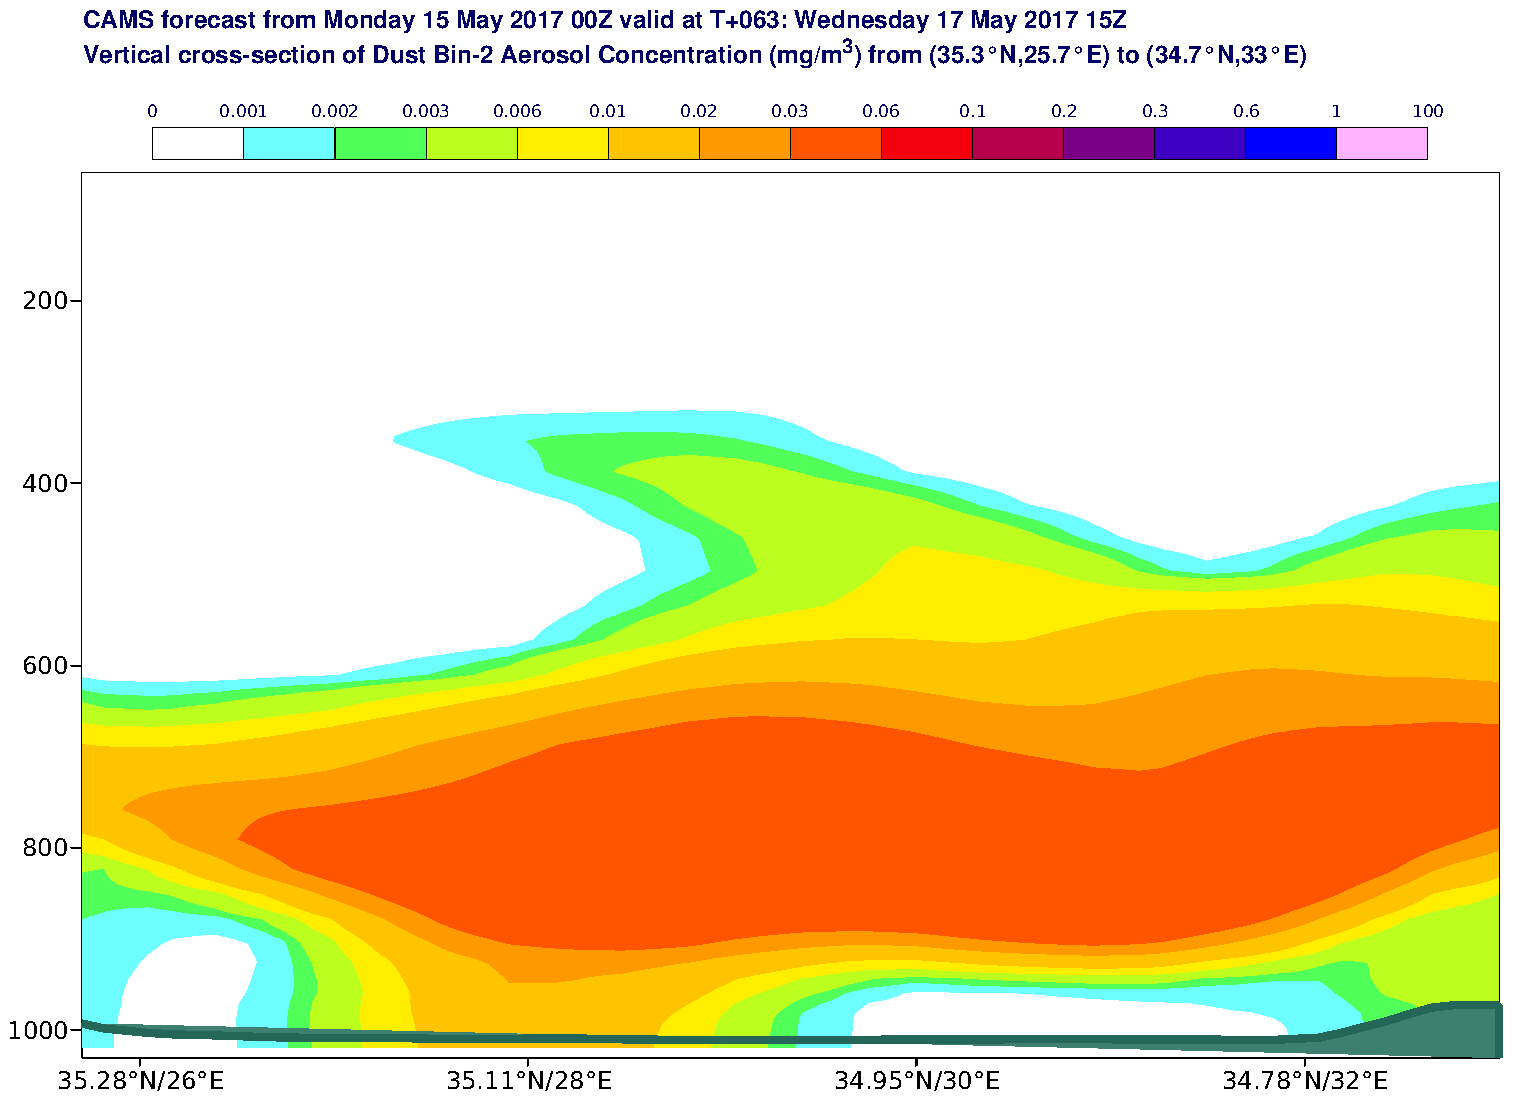 Vertical cross-section of Dust Bin-2 Aerosol Concentration (mg/m3) valid at T63 - 2017-05-17 15:00